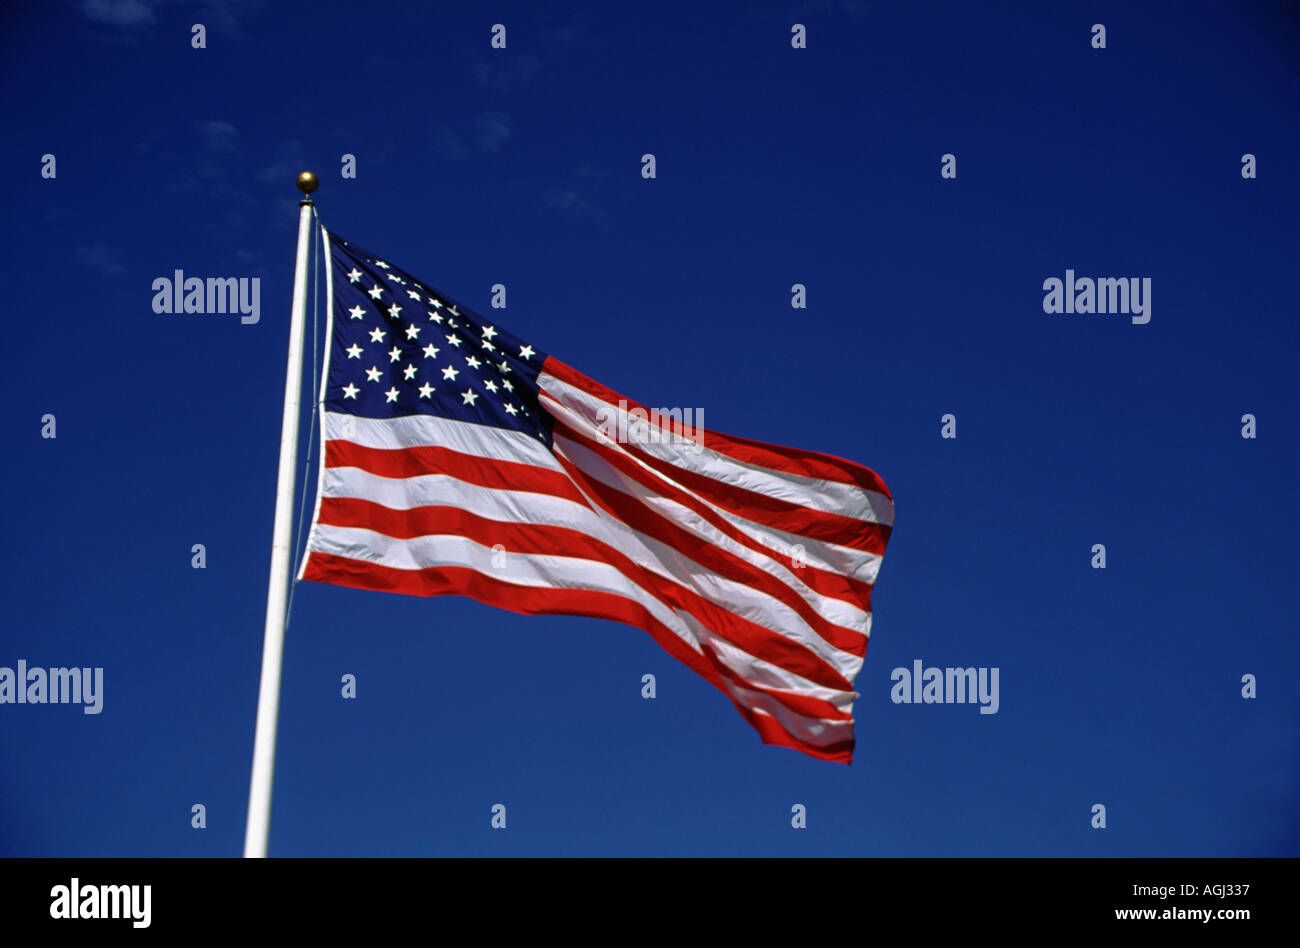 United States flag against clear blue sky Banque D'Images